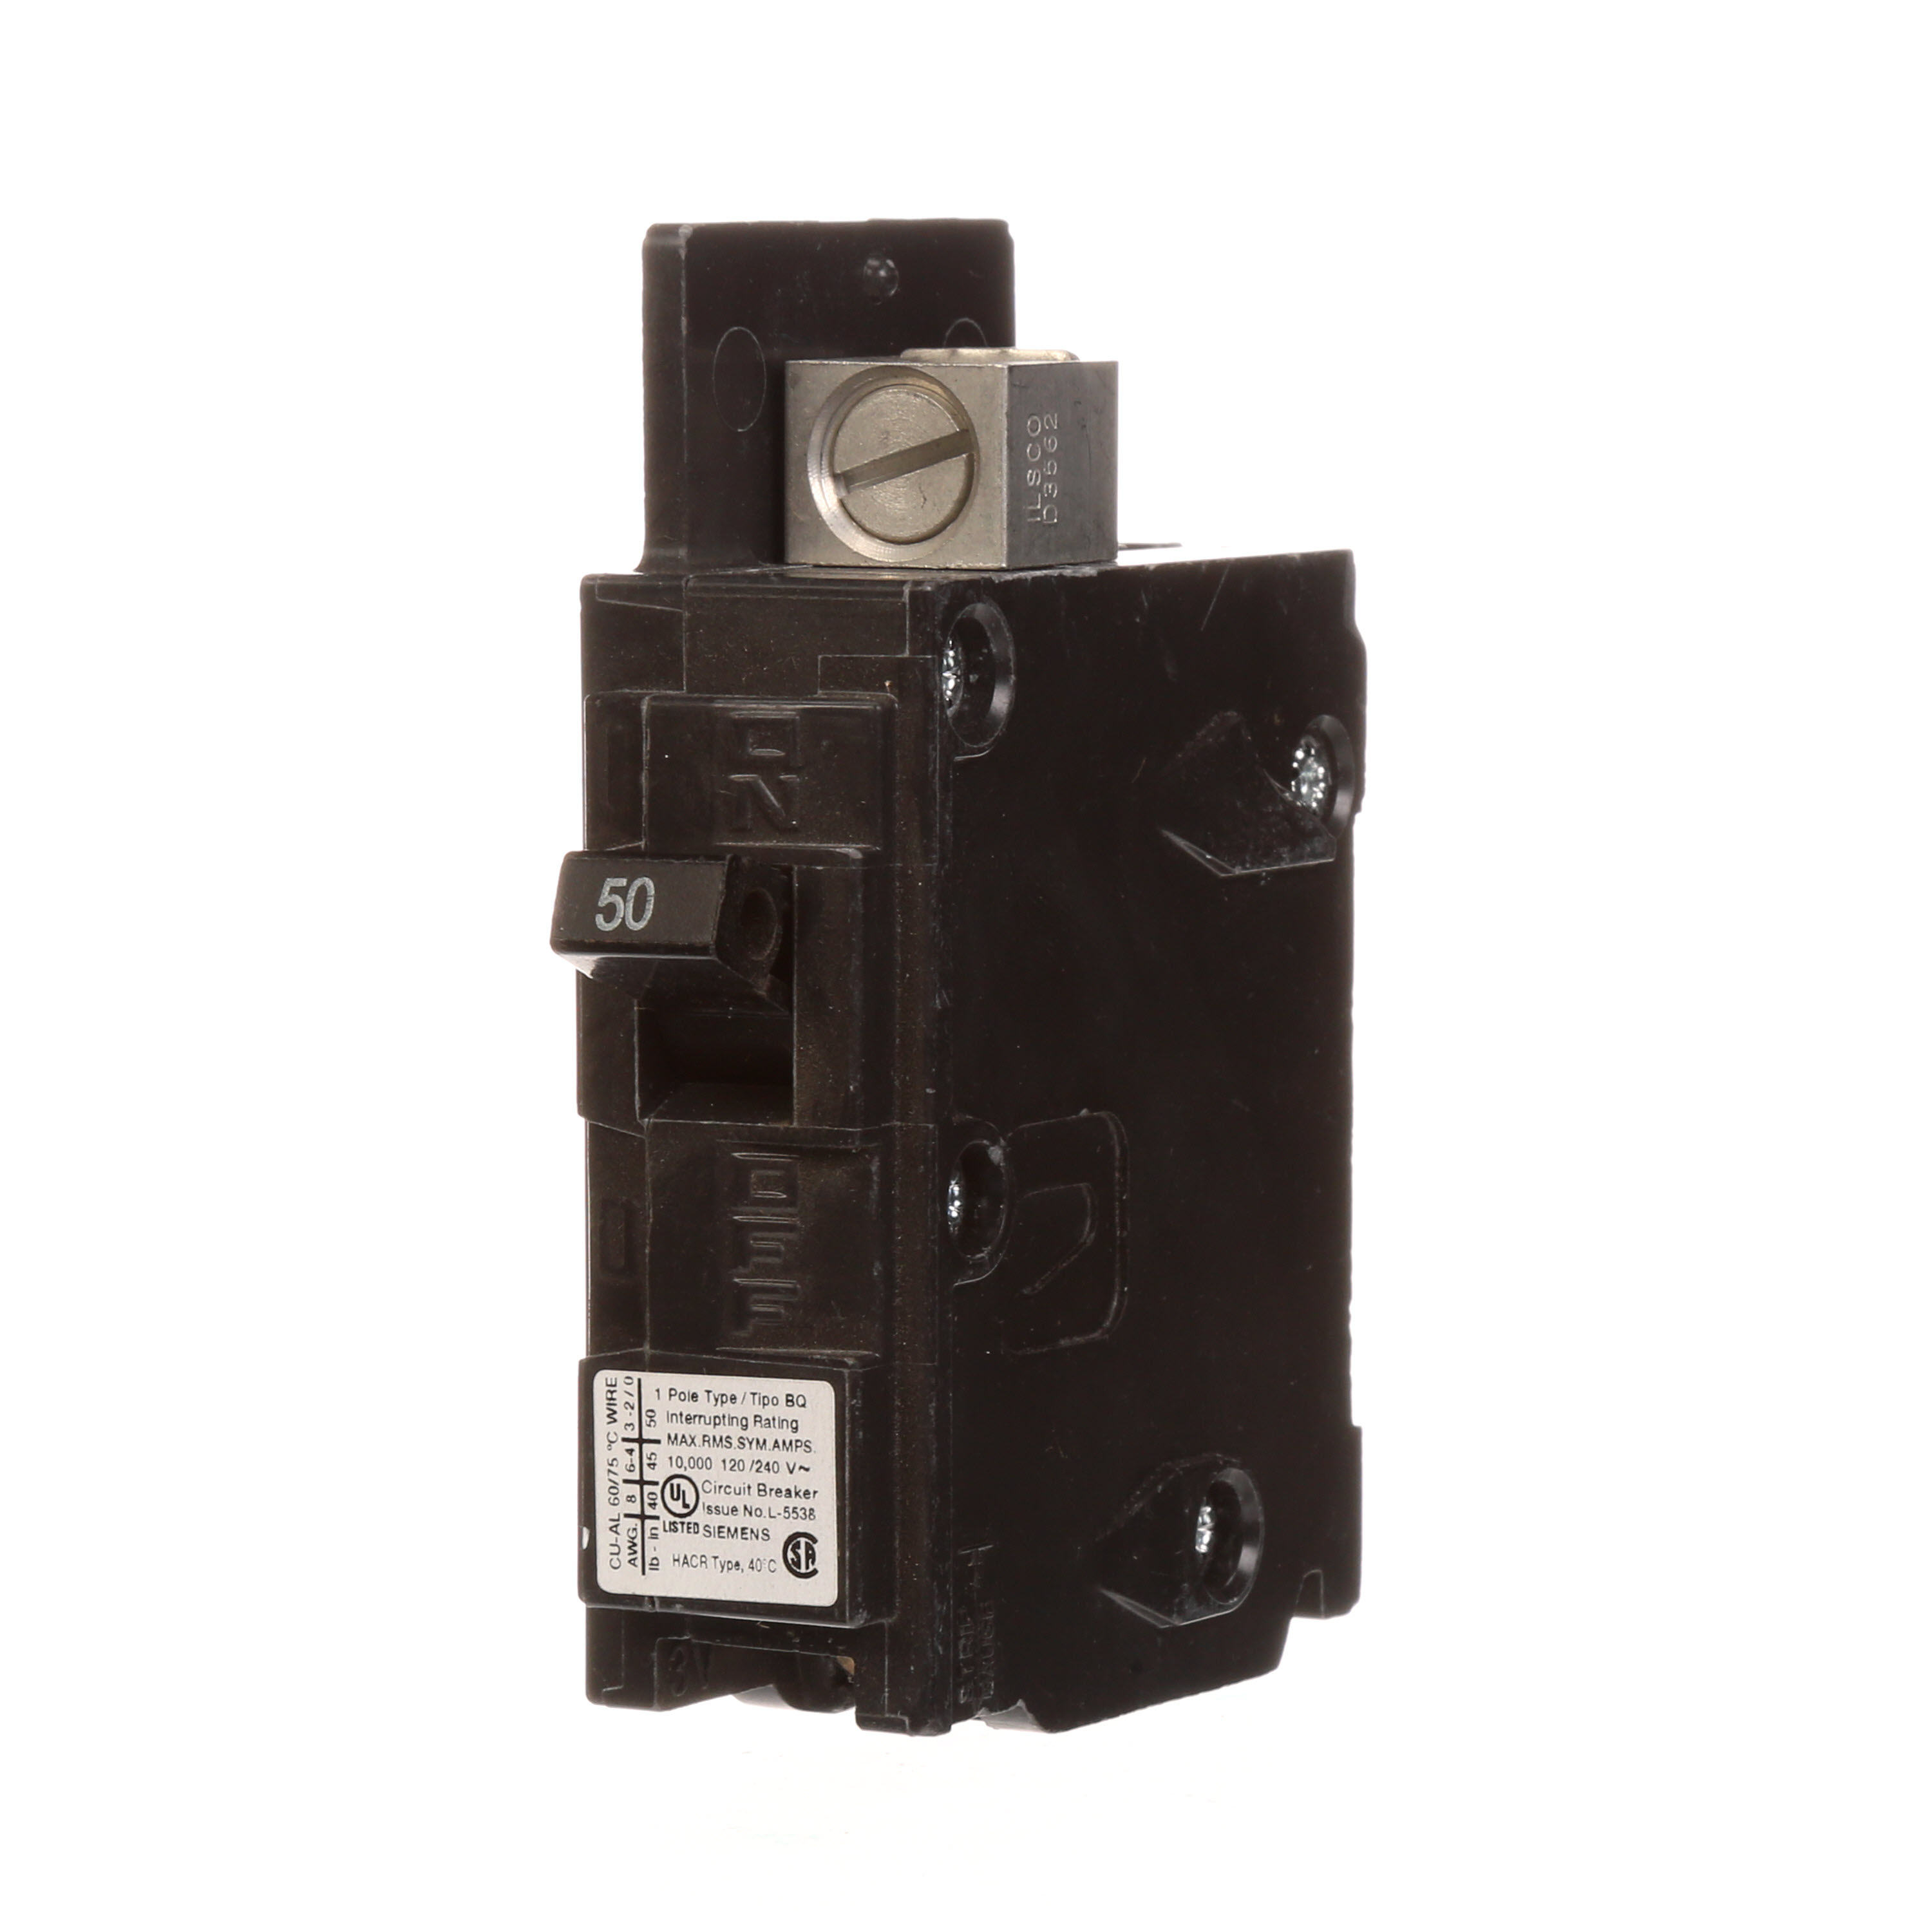 Siemens Low Voltage Molded Case Circuit Breakers General Purpose MCCBs are Circuit Protection Molded Case Circuit Breakers. 1-Pole circuit breaker type BQ. Rated 120V (050A) (AIR 10 kA). Special features line side lugs included. Note Load side lugs are included.